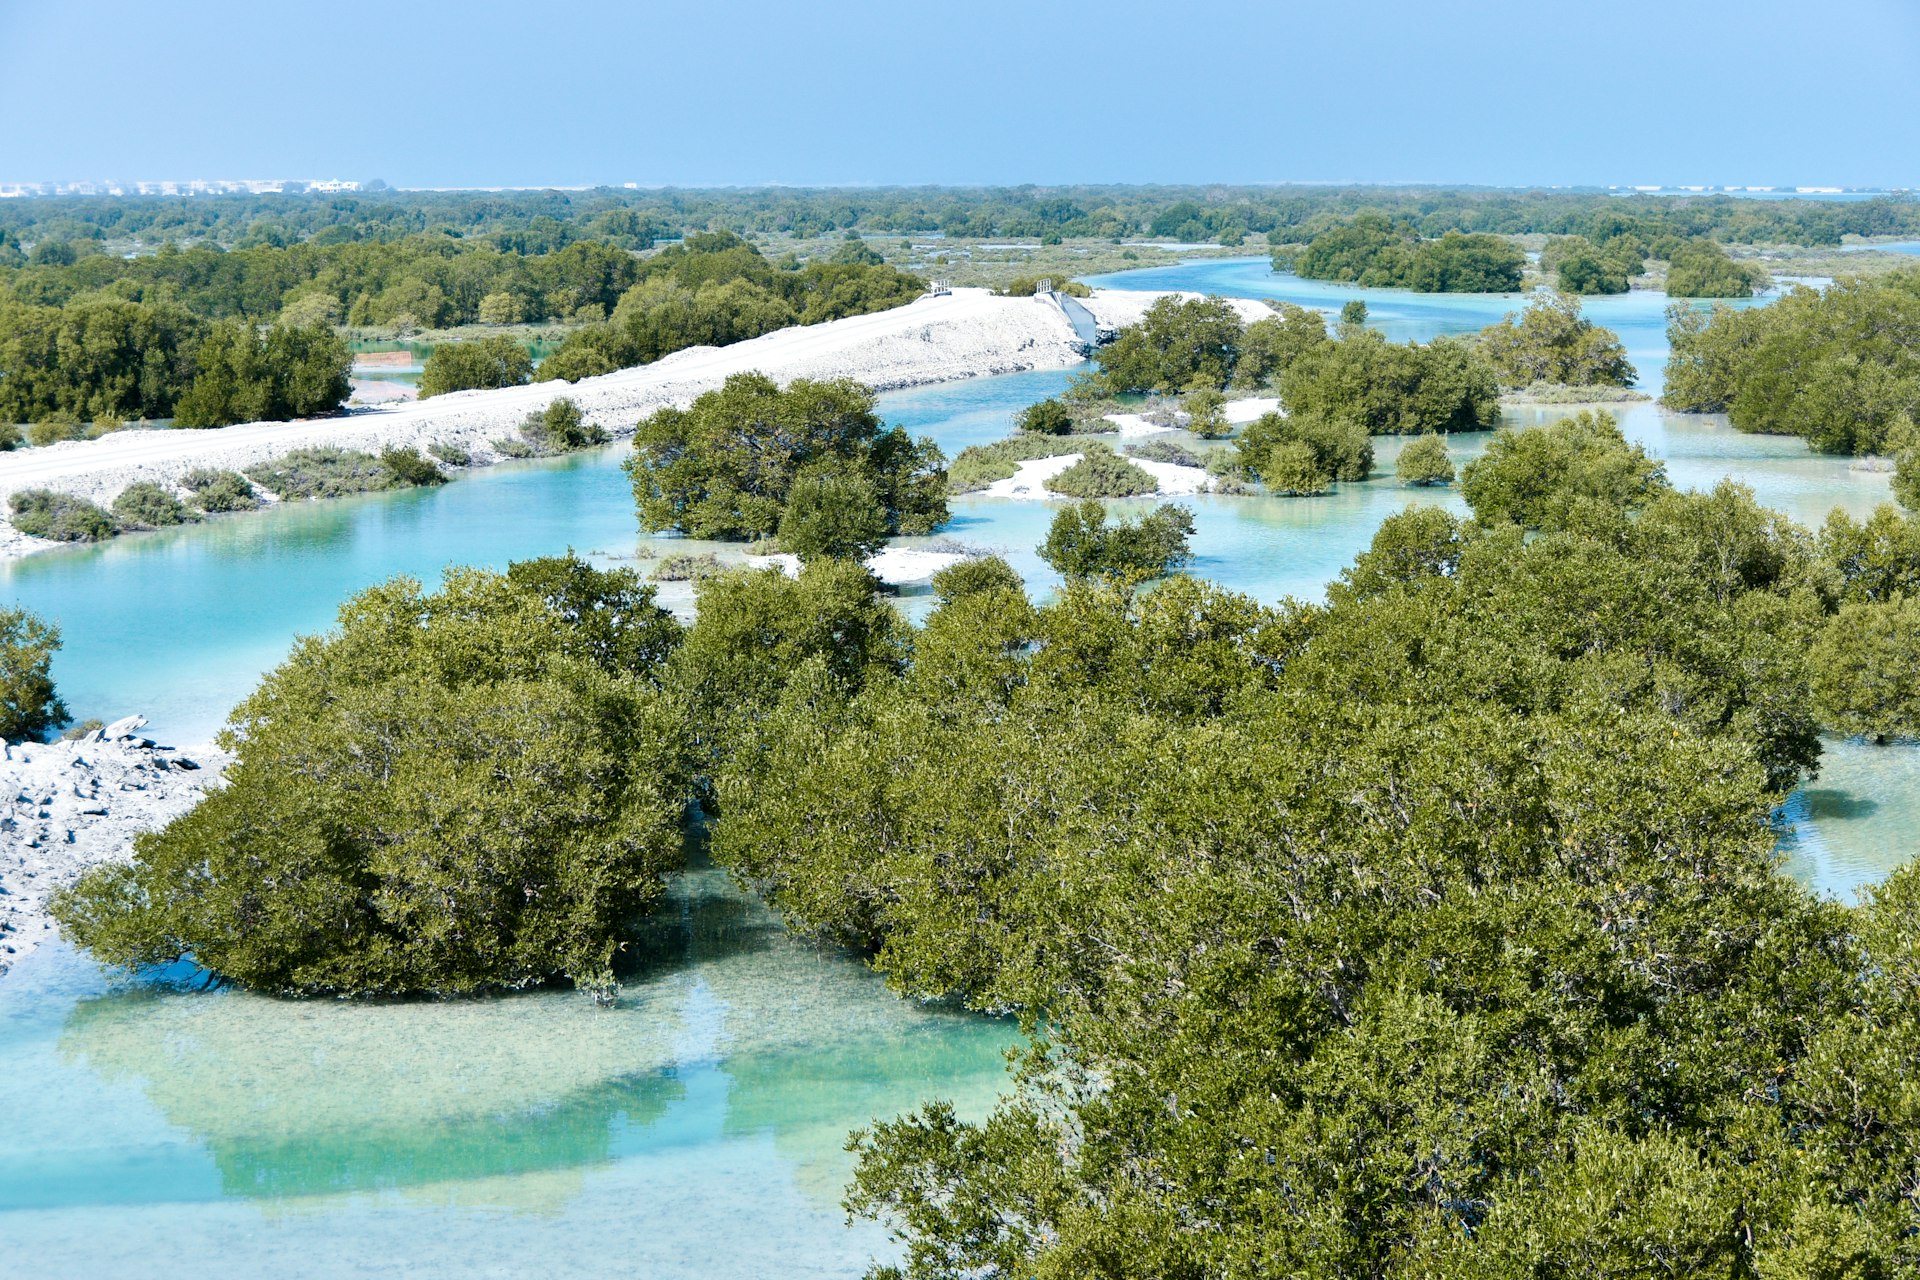 An aerial view of mangrove forests in Abu Dhabi